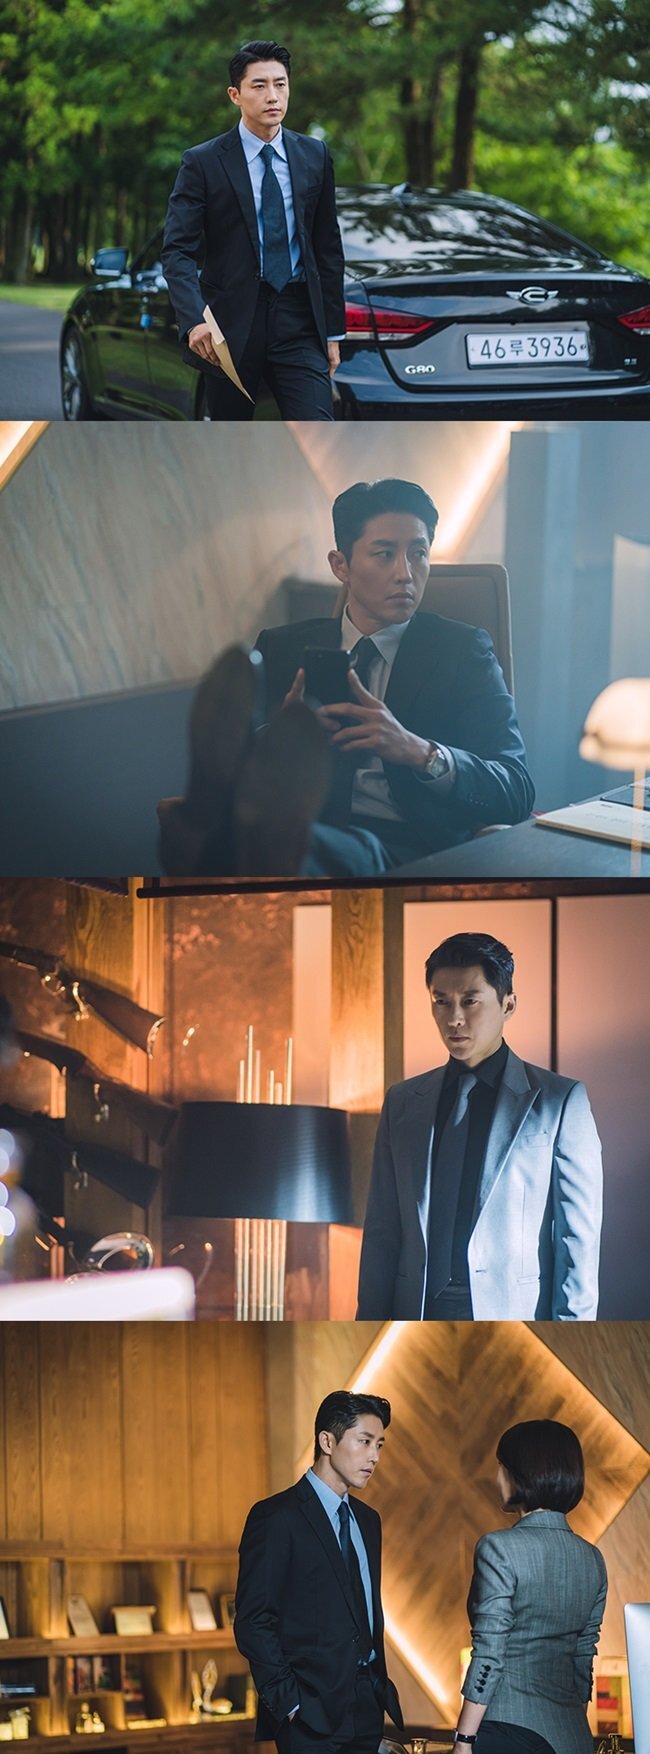 The still released on the 3rd featured a figure of the Hyun Woo-sung, who boasts an extraordinary suit fit in the TVN tree The Tragedy of The Road 1 1.In the play, Hyun Woo-sung is a member of Cho Hae-jin, who is commonly called Cho Sang-moo, and is a member of the Seo Gi-tae (Cheon Ho-Jin).The tie of the knot, which is tightly tied to the neck and cool eyes for each appearance, melts perfectly into the character of the shrewd ancestor.The wide shoulders and unreal proportions that complete the perfect suit line are particularly good enough to capture the Sight.MBN Elegant House, and Wavve Love Scene Number #, which have been accumulated through the acting interior and the character firepower, are drawing a weighty character called Ancestor, which is a coexistence of eerie and charisma.Meanwhile, The Tragedy of The Road 1 1 is a mystery drama depicting the silence and avoidance of the terrible and tragic events that occurred at night when heavy rains were pouring, and another tragedy caused by secrets. It is starring Ji Jin-hee, Yoon Se-a, Kim Hye-eun and Cheon Ho-Jin.